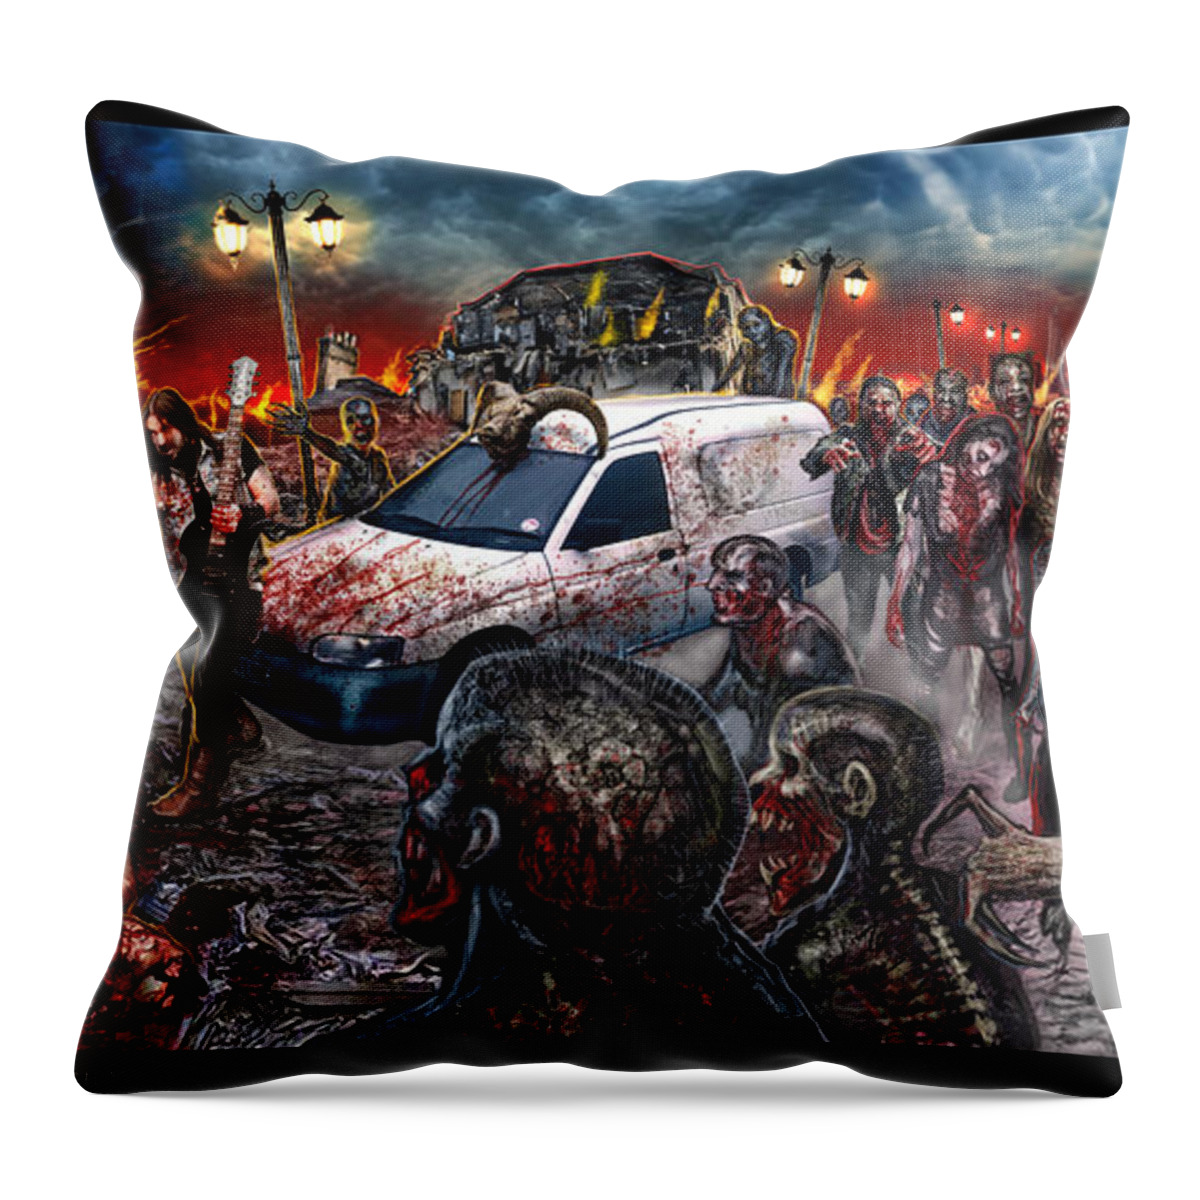 Tony Koehl Throw Pillow featuring the mixed media They Will Take Over If You Let Them by Tony Koehl